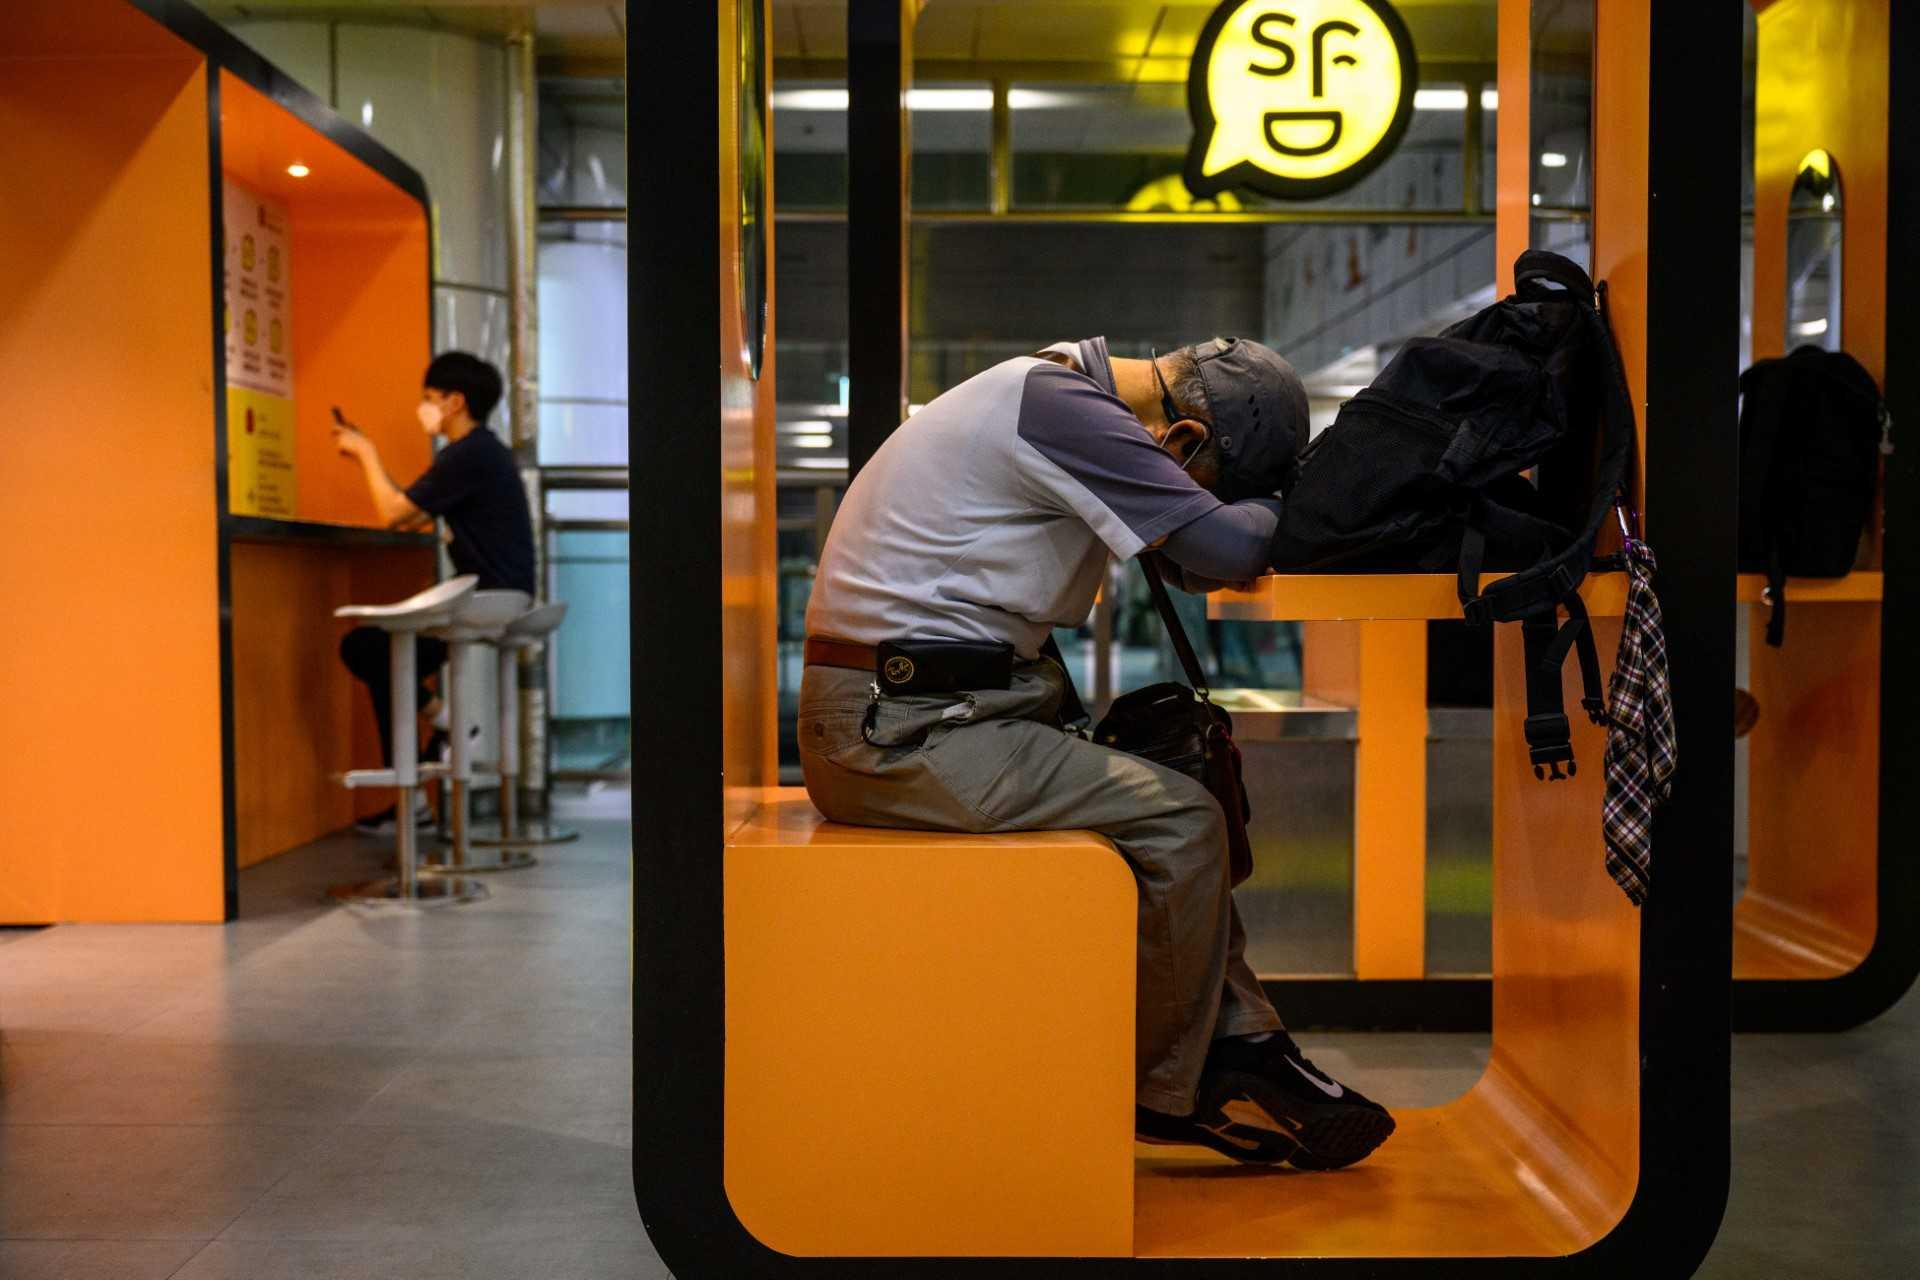 A man sleeps at a cubicle in an area for relaxing, charging electronic device batteries or desk work, in a metro underground train station in the Gangnam district of Seoul on Aug 12. Photo: AFP 